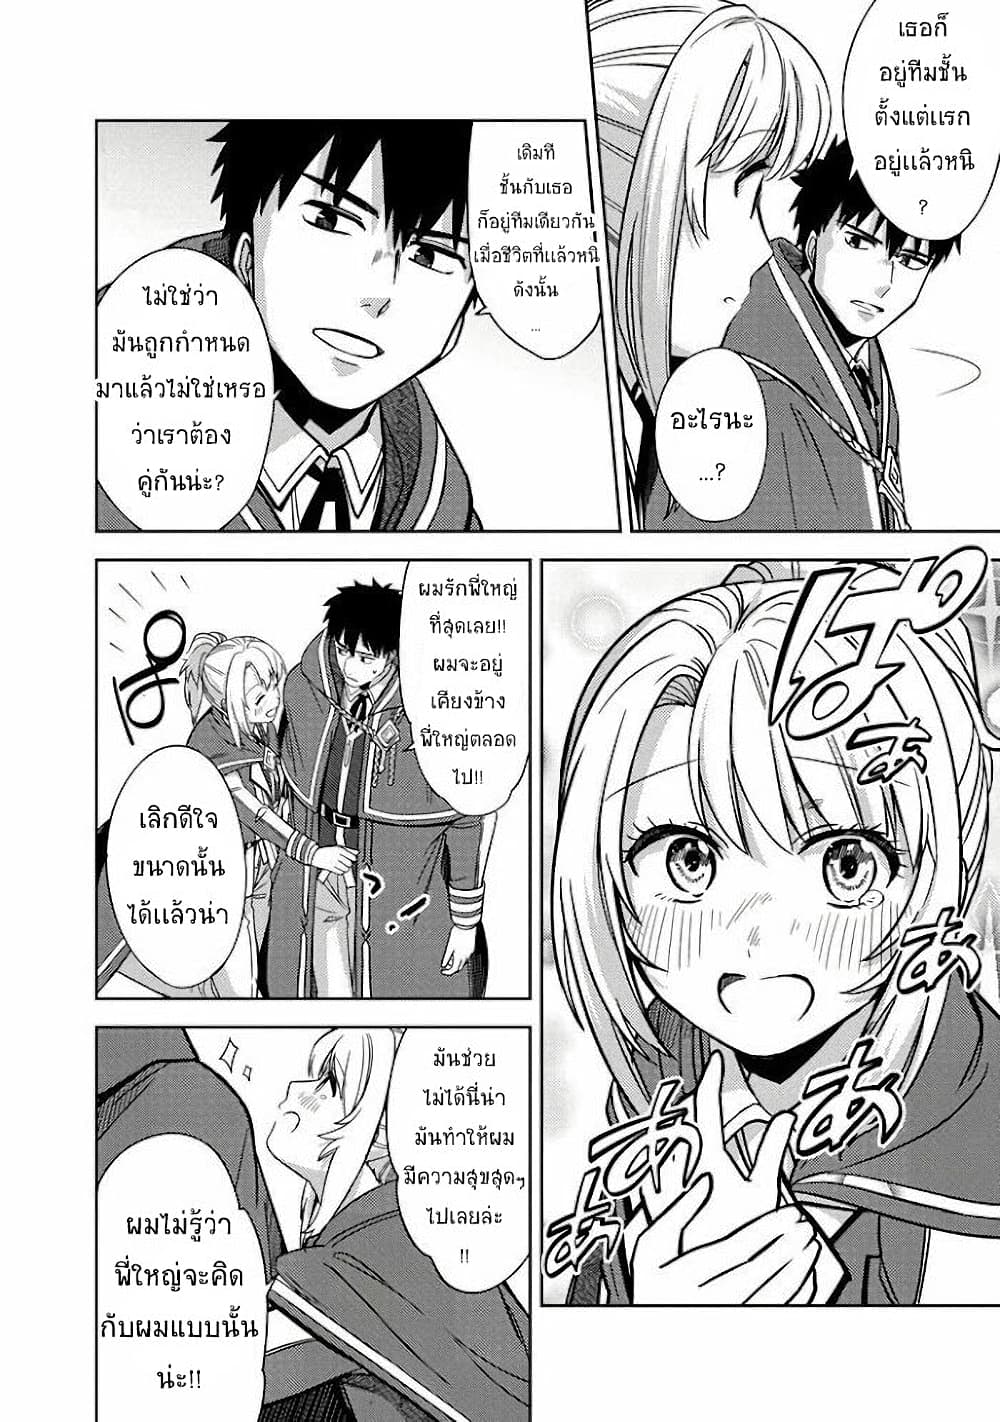 The Reincarnated Swordsman With 9999 Strength Wants to Become a Magician! ตอนที่ 5 (6)